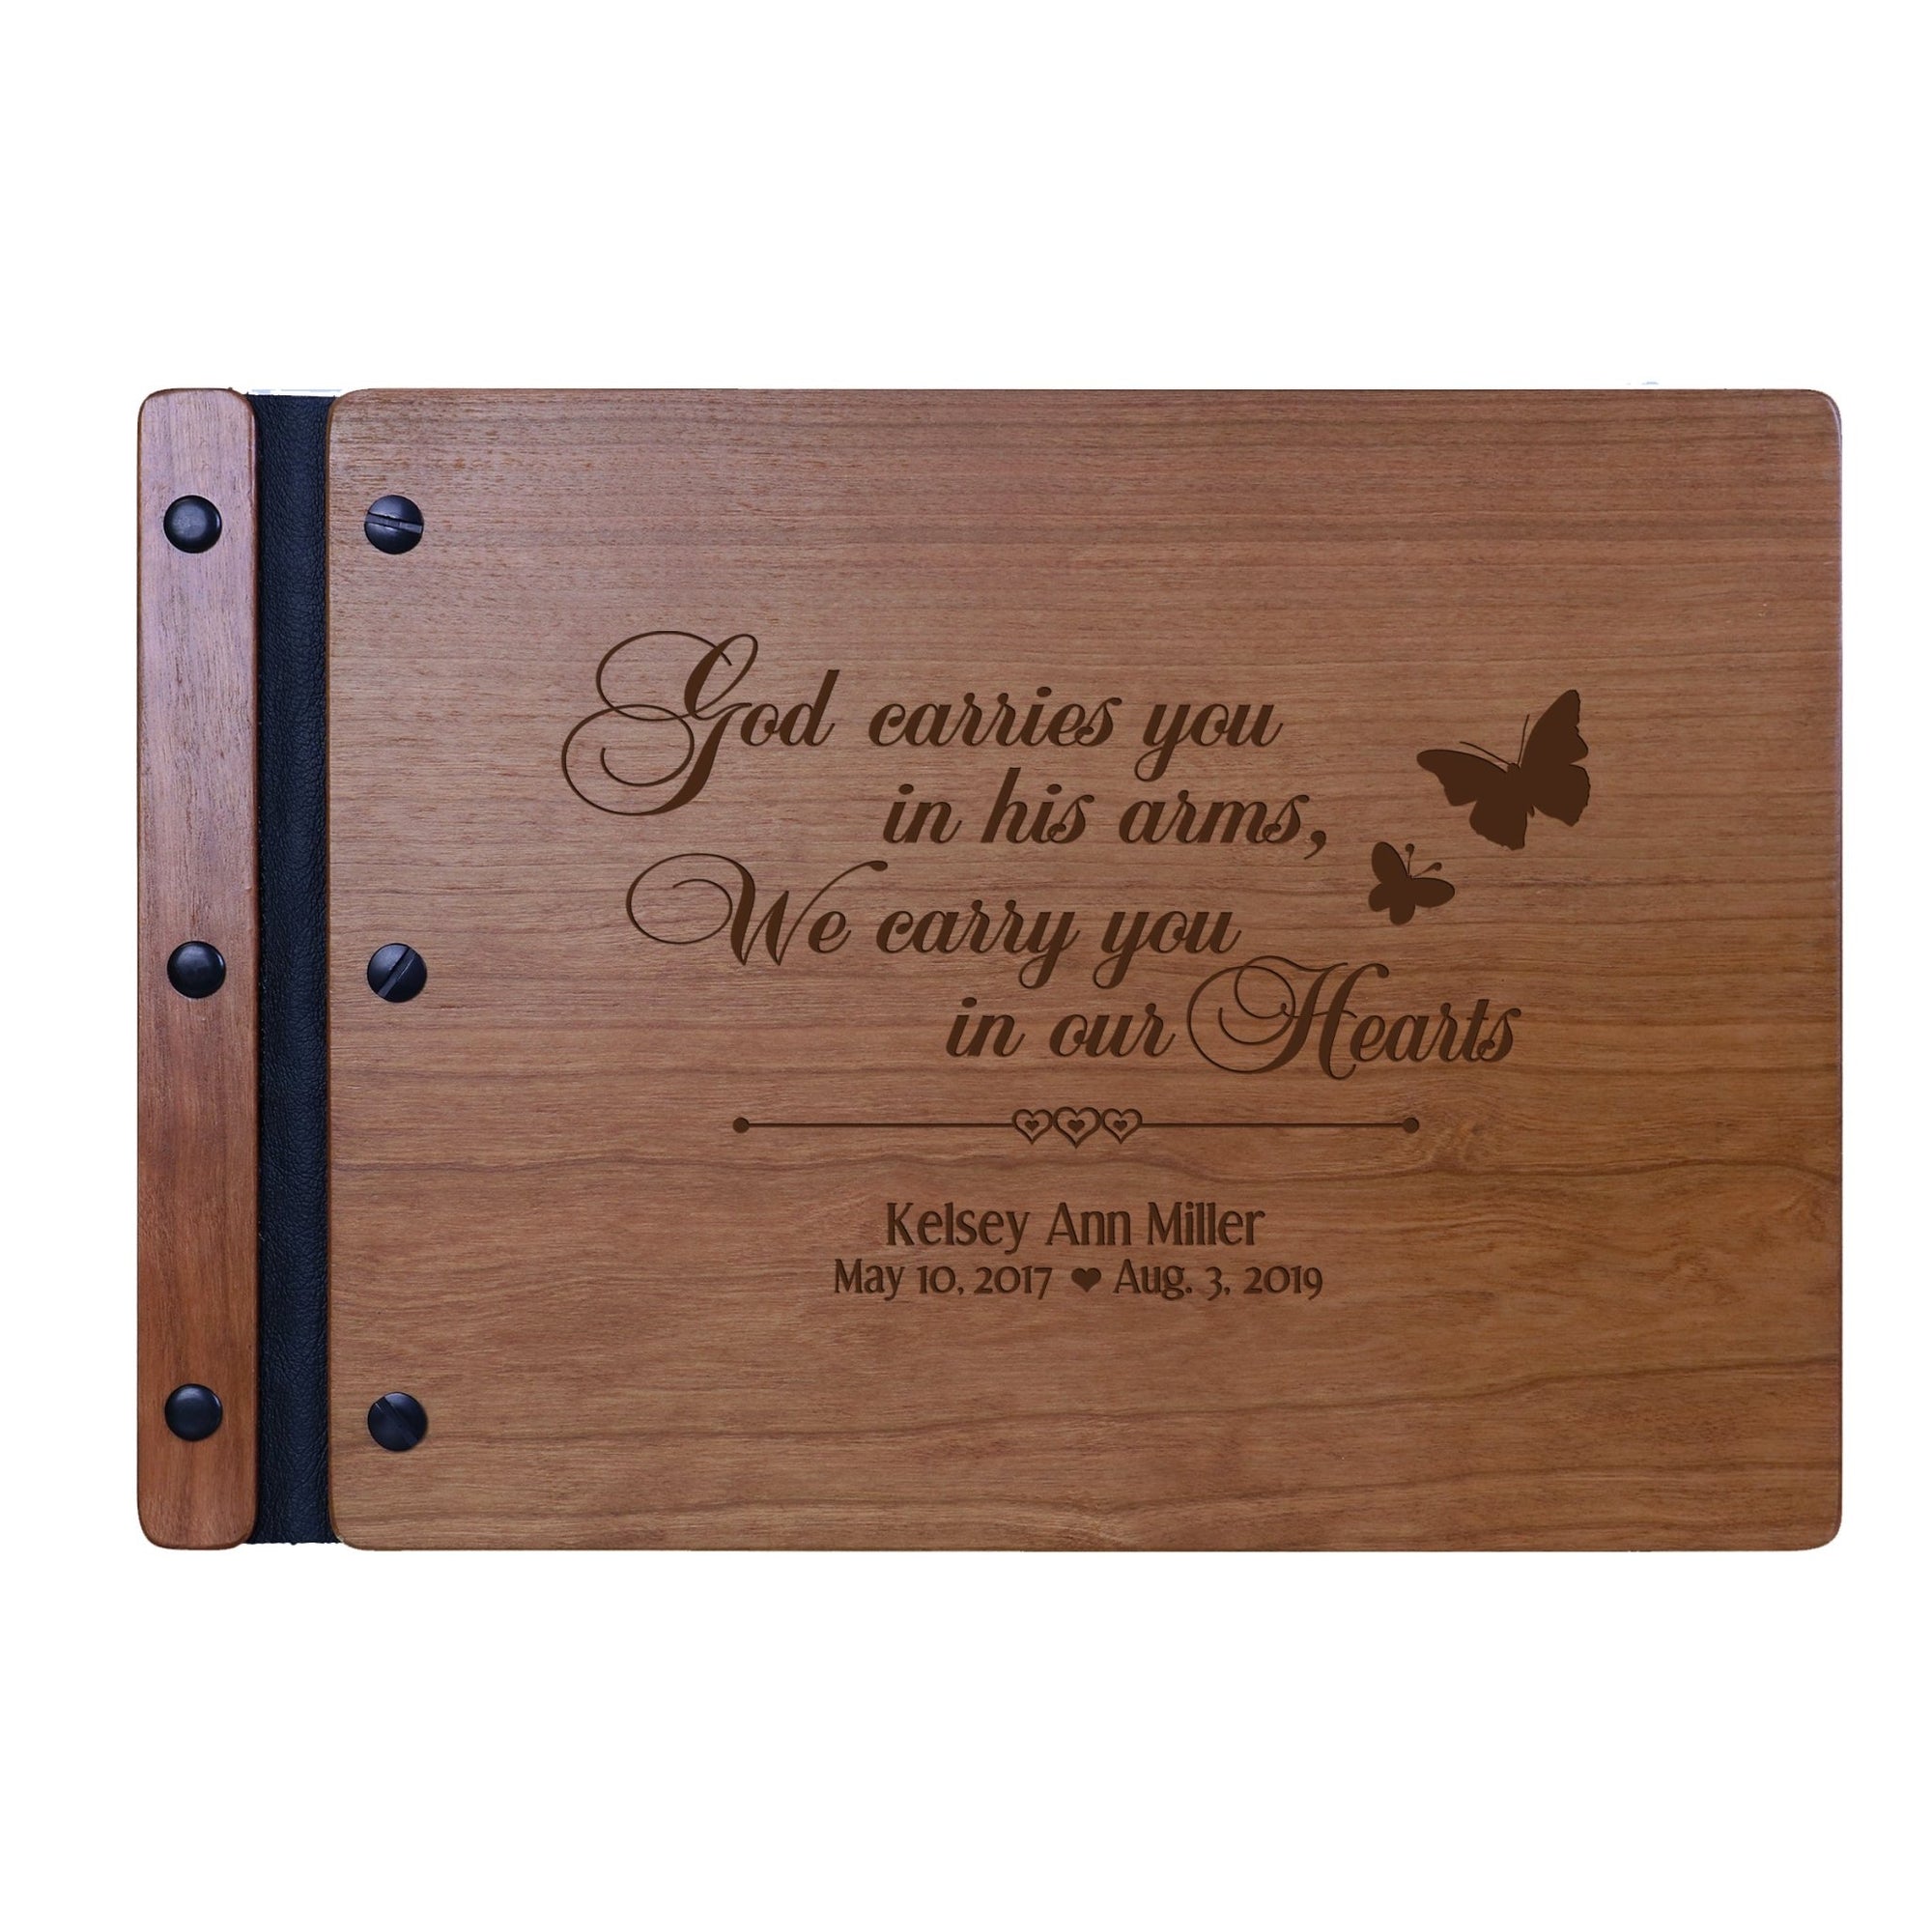 Personalized Memorial Guest Book - In His Arms - LifeSong Milestones